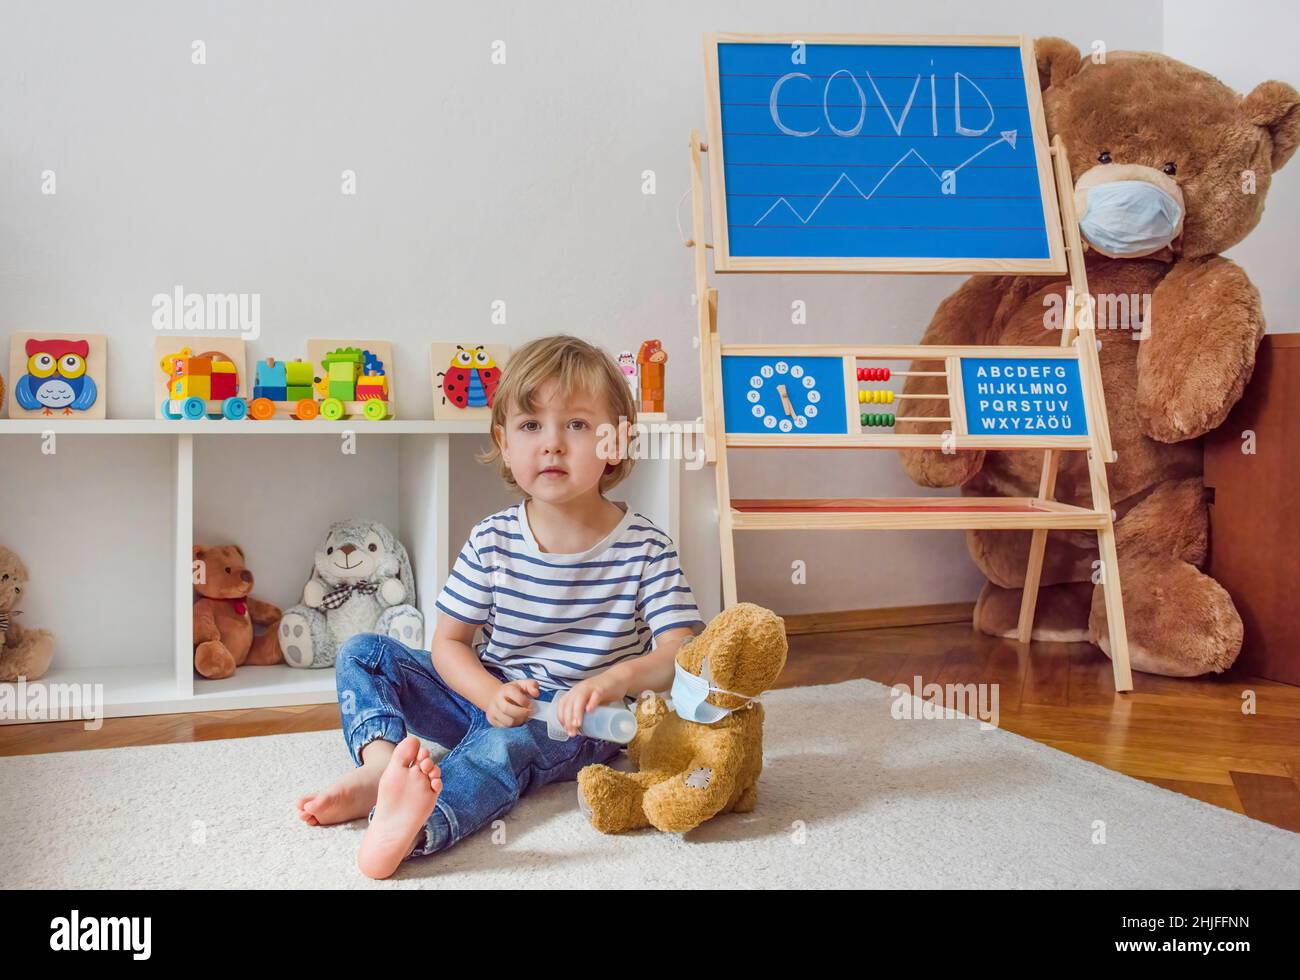 Cute child boy in home quarantine playing doctor on the floor with his sick teddy bears wearing medical masks during coronavirus COVID-2019 outbreak Stock Photo